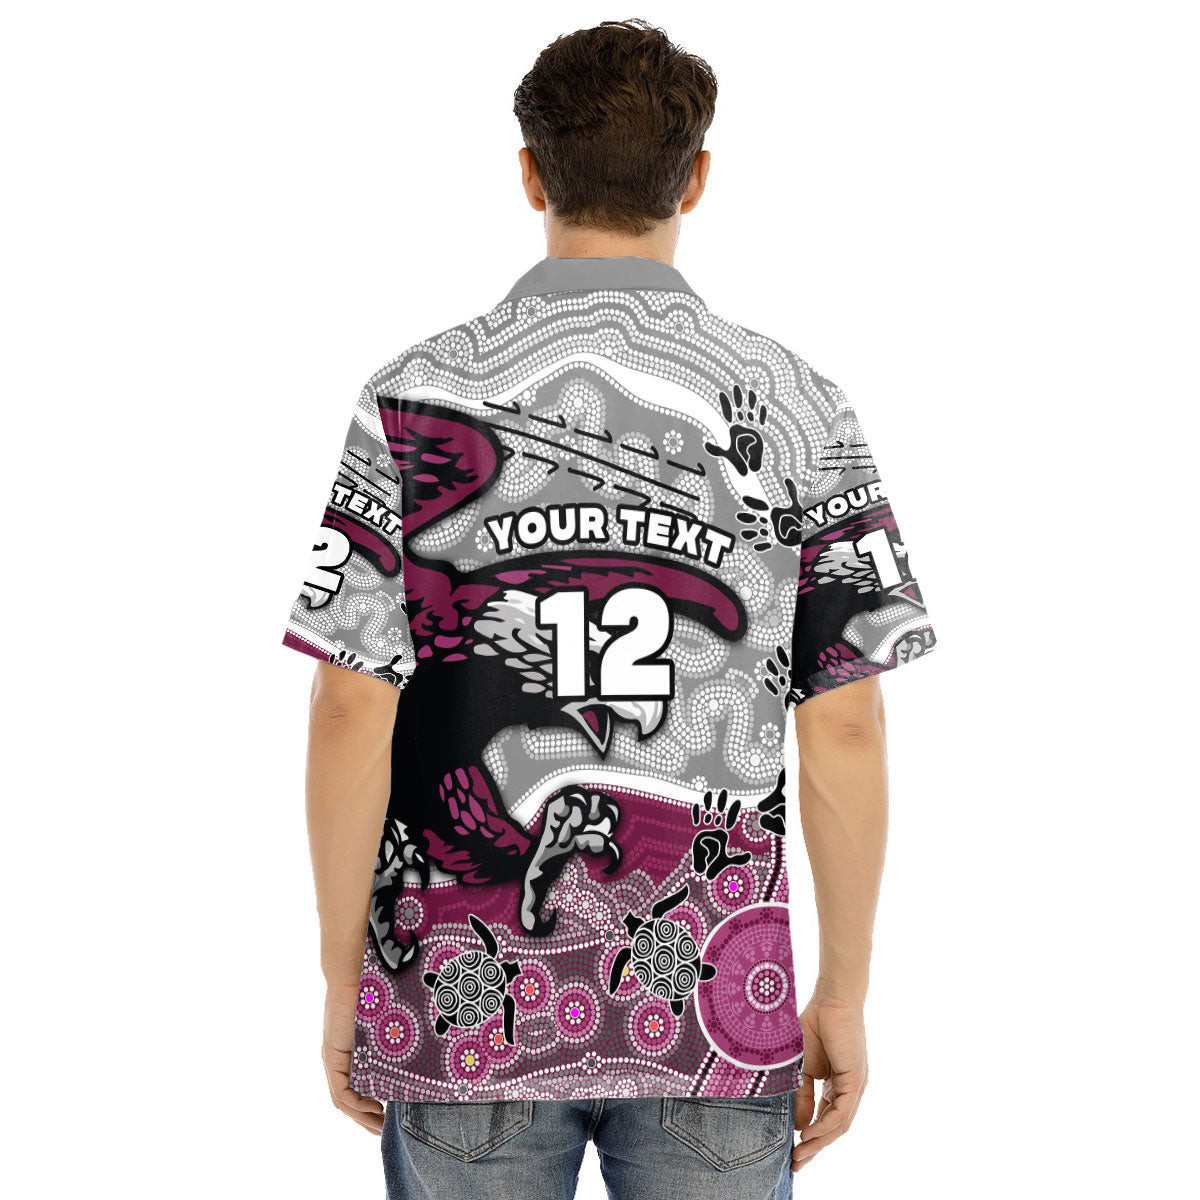 RugbyLife Hawaii Shirt - (Personalized) Sea Eagles Aboriginal Style